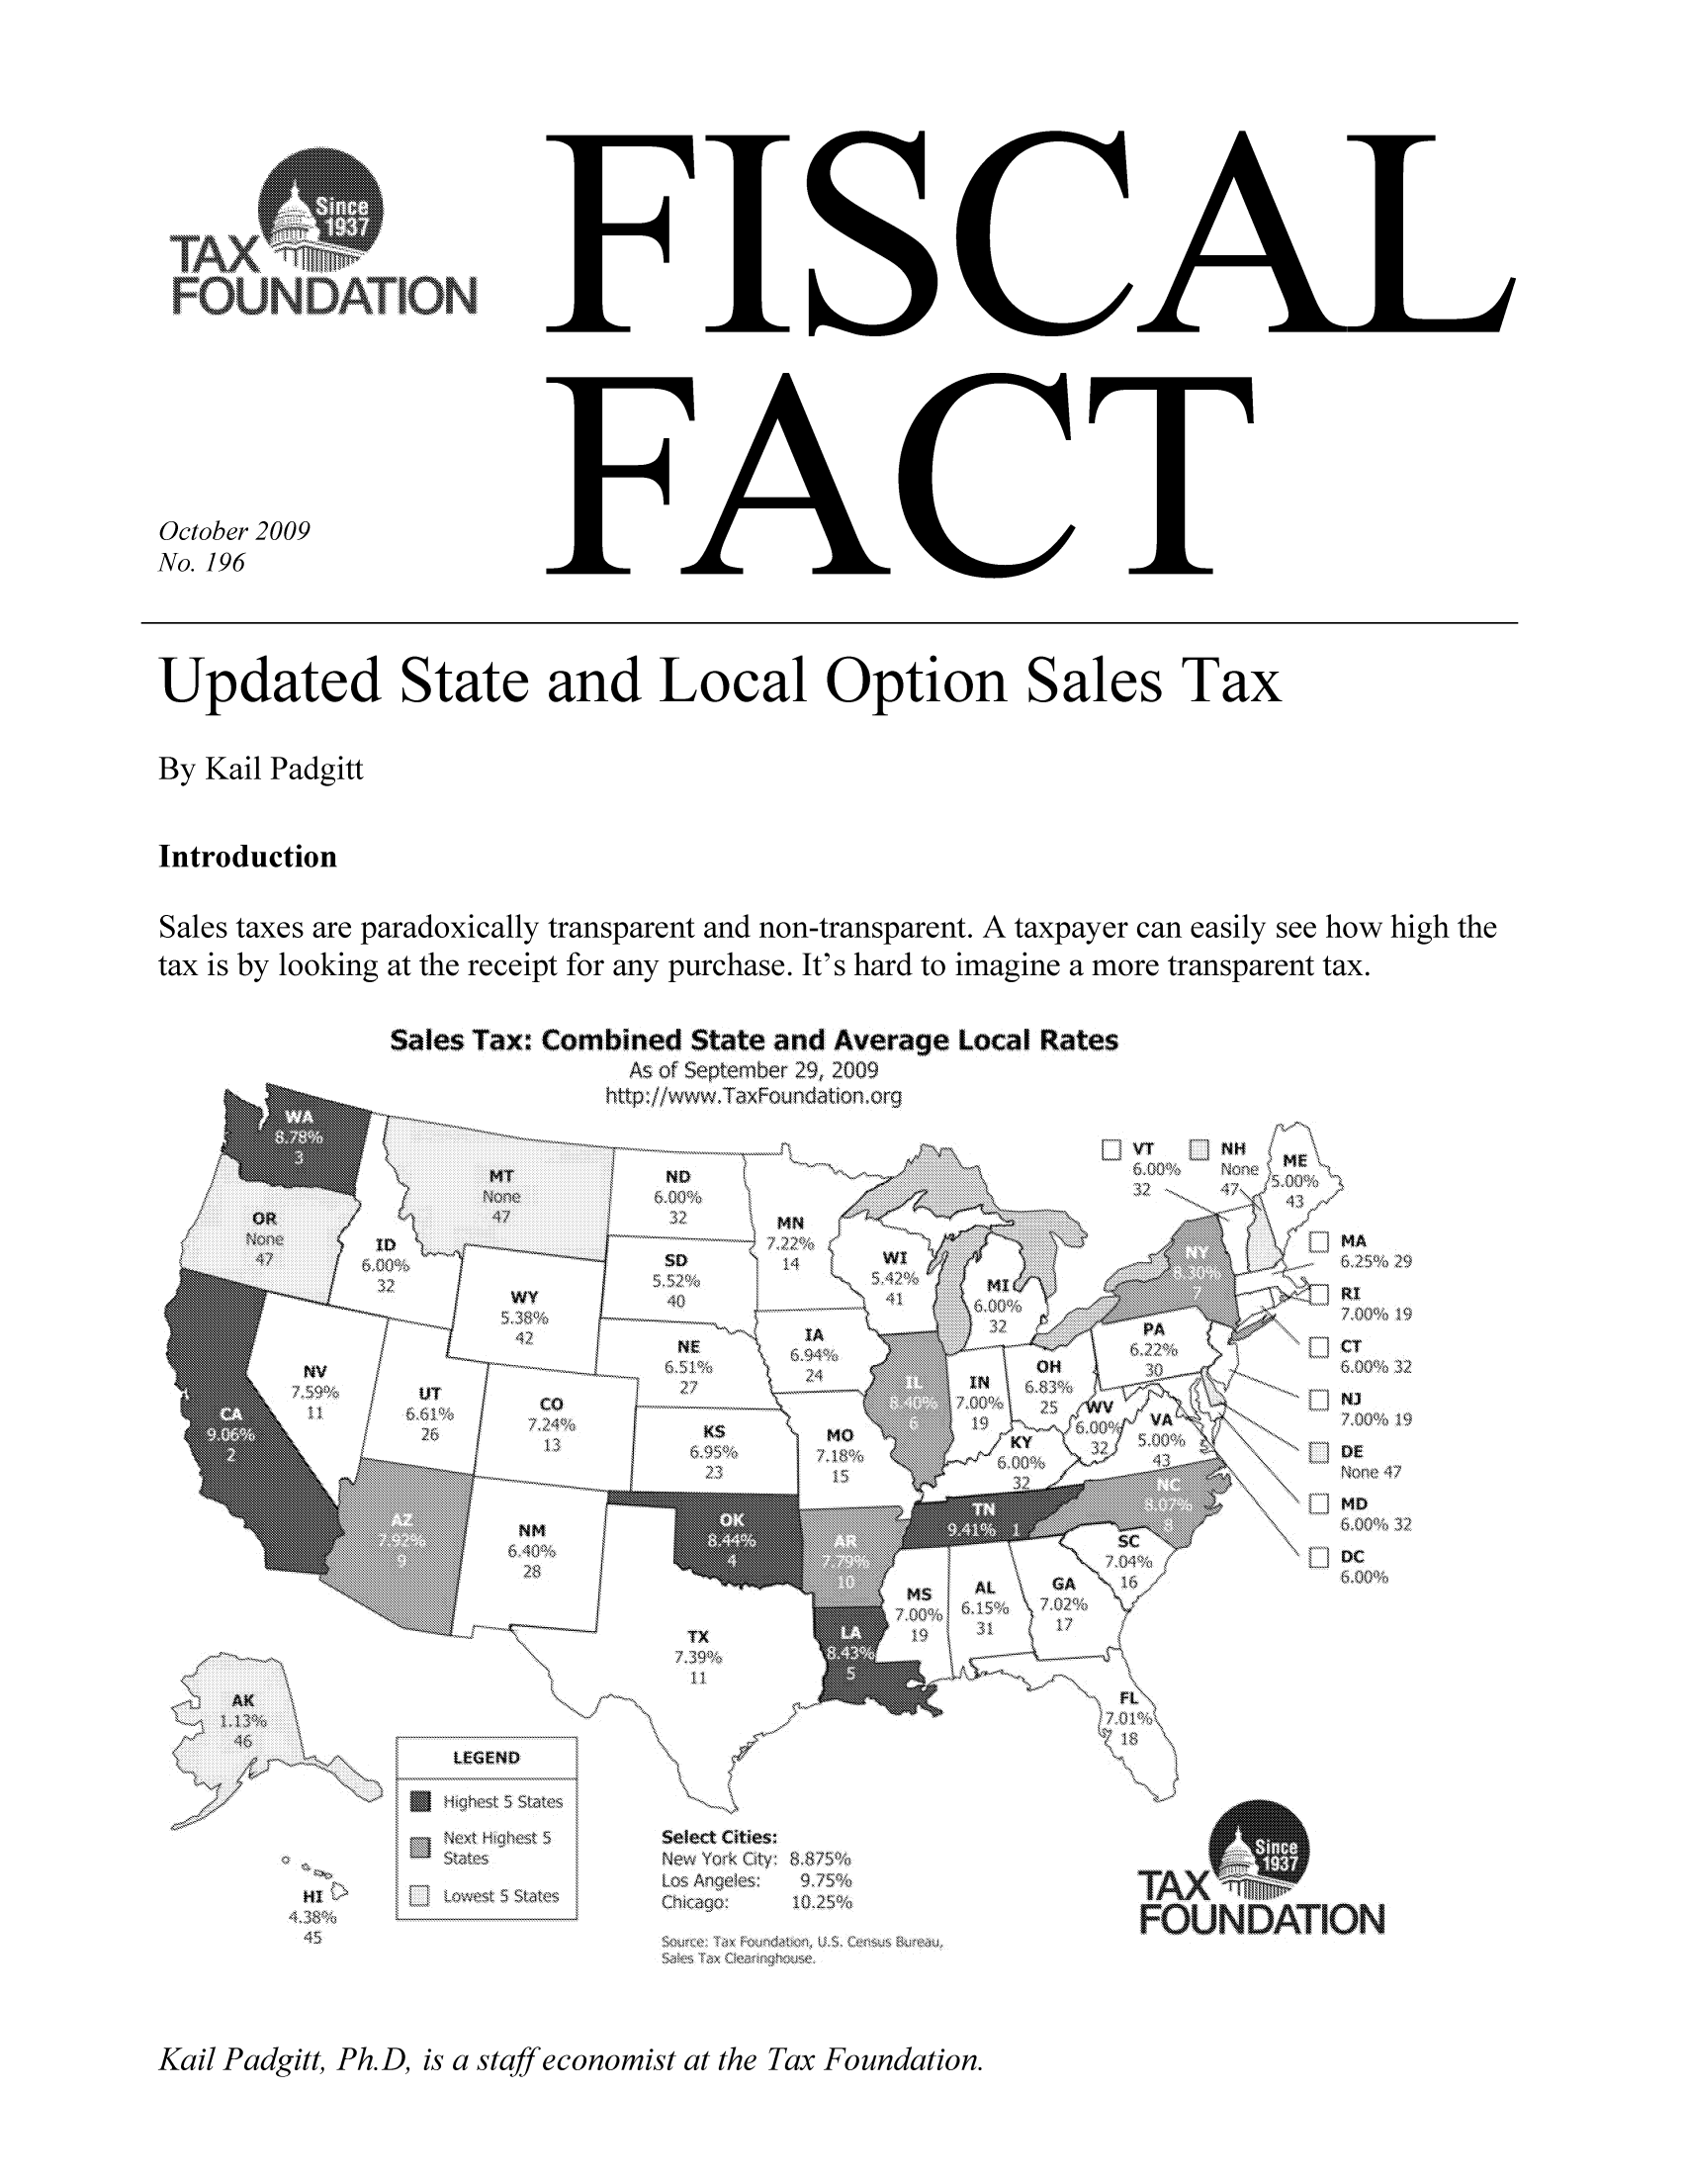 handle is hein.taxfoundation/ffbjgxz0001 and id is 1 raw text is: FISCAL

FACT

October 2009
No. 196

Updated State and Local Option Sales Tax
By Kail Padgitt
Introduction
Sales taxes are paradoxically transparent and non-transparent. A taxpayer can easily see how high the
tax is by looking at the receipt for any purchase. It's hard to imagine a more transparent tax.

Sales Tax.* Combined State and Average Local Rates
As of September 29, 2009
ltp./www.T:xFoundation org

..  z    ............  . .  .
NO
32  MN
. ...:.....,
So D:w
5,53,2%         42%
....               ........
.........
.................
232
IAN
NE~
KS       Mo
6,95%              P-

O:H
6,83%

mssl   AL      G
. .......-

ll, w  j  M\
NH             IN.
>~<        MD
....... 6,25%  29
11
V.A7,008%19
DE
....-.....  MD
6 00% 32
s\,
DC80

; FiL\

Select Cities,
N ew# YoGCty, 8.8,511¢,:
Los Angeles,   9J5%
Chicago:     .10,25%

Kail Padgitt, Ph.D, is a staff economist at the Tax Foundation.

WY
NM
,28%

TX
11,

LEGEND

Lohes- 5 Saes
'1x-Th Lk:i::!s

HI,<

TION

FOUNDATION


